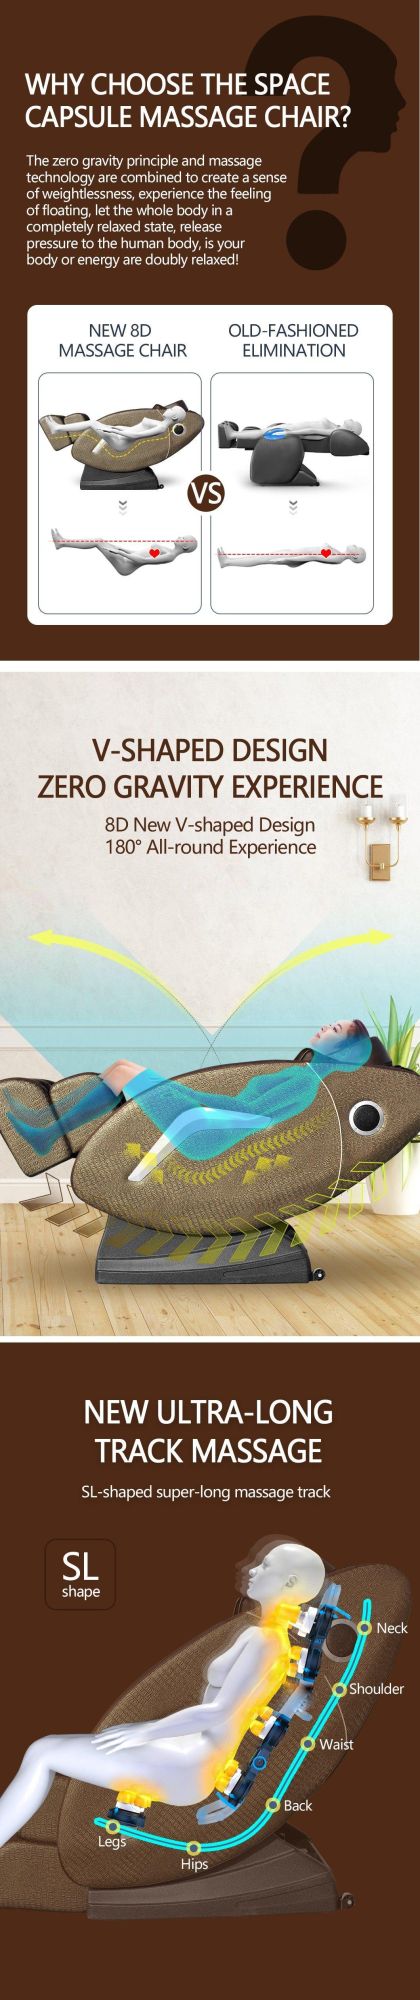 New Desig U Pillow L Track Full Body Zero Gravity High-End Good Quality with Cheap Price Best Massage Chair